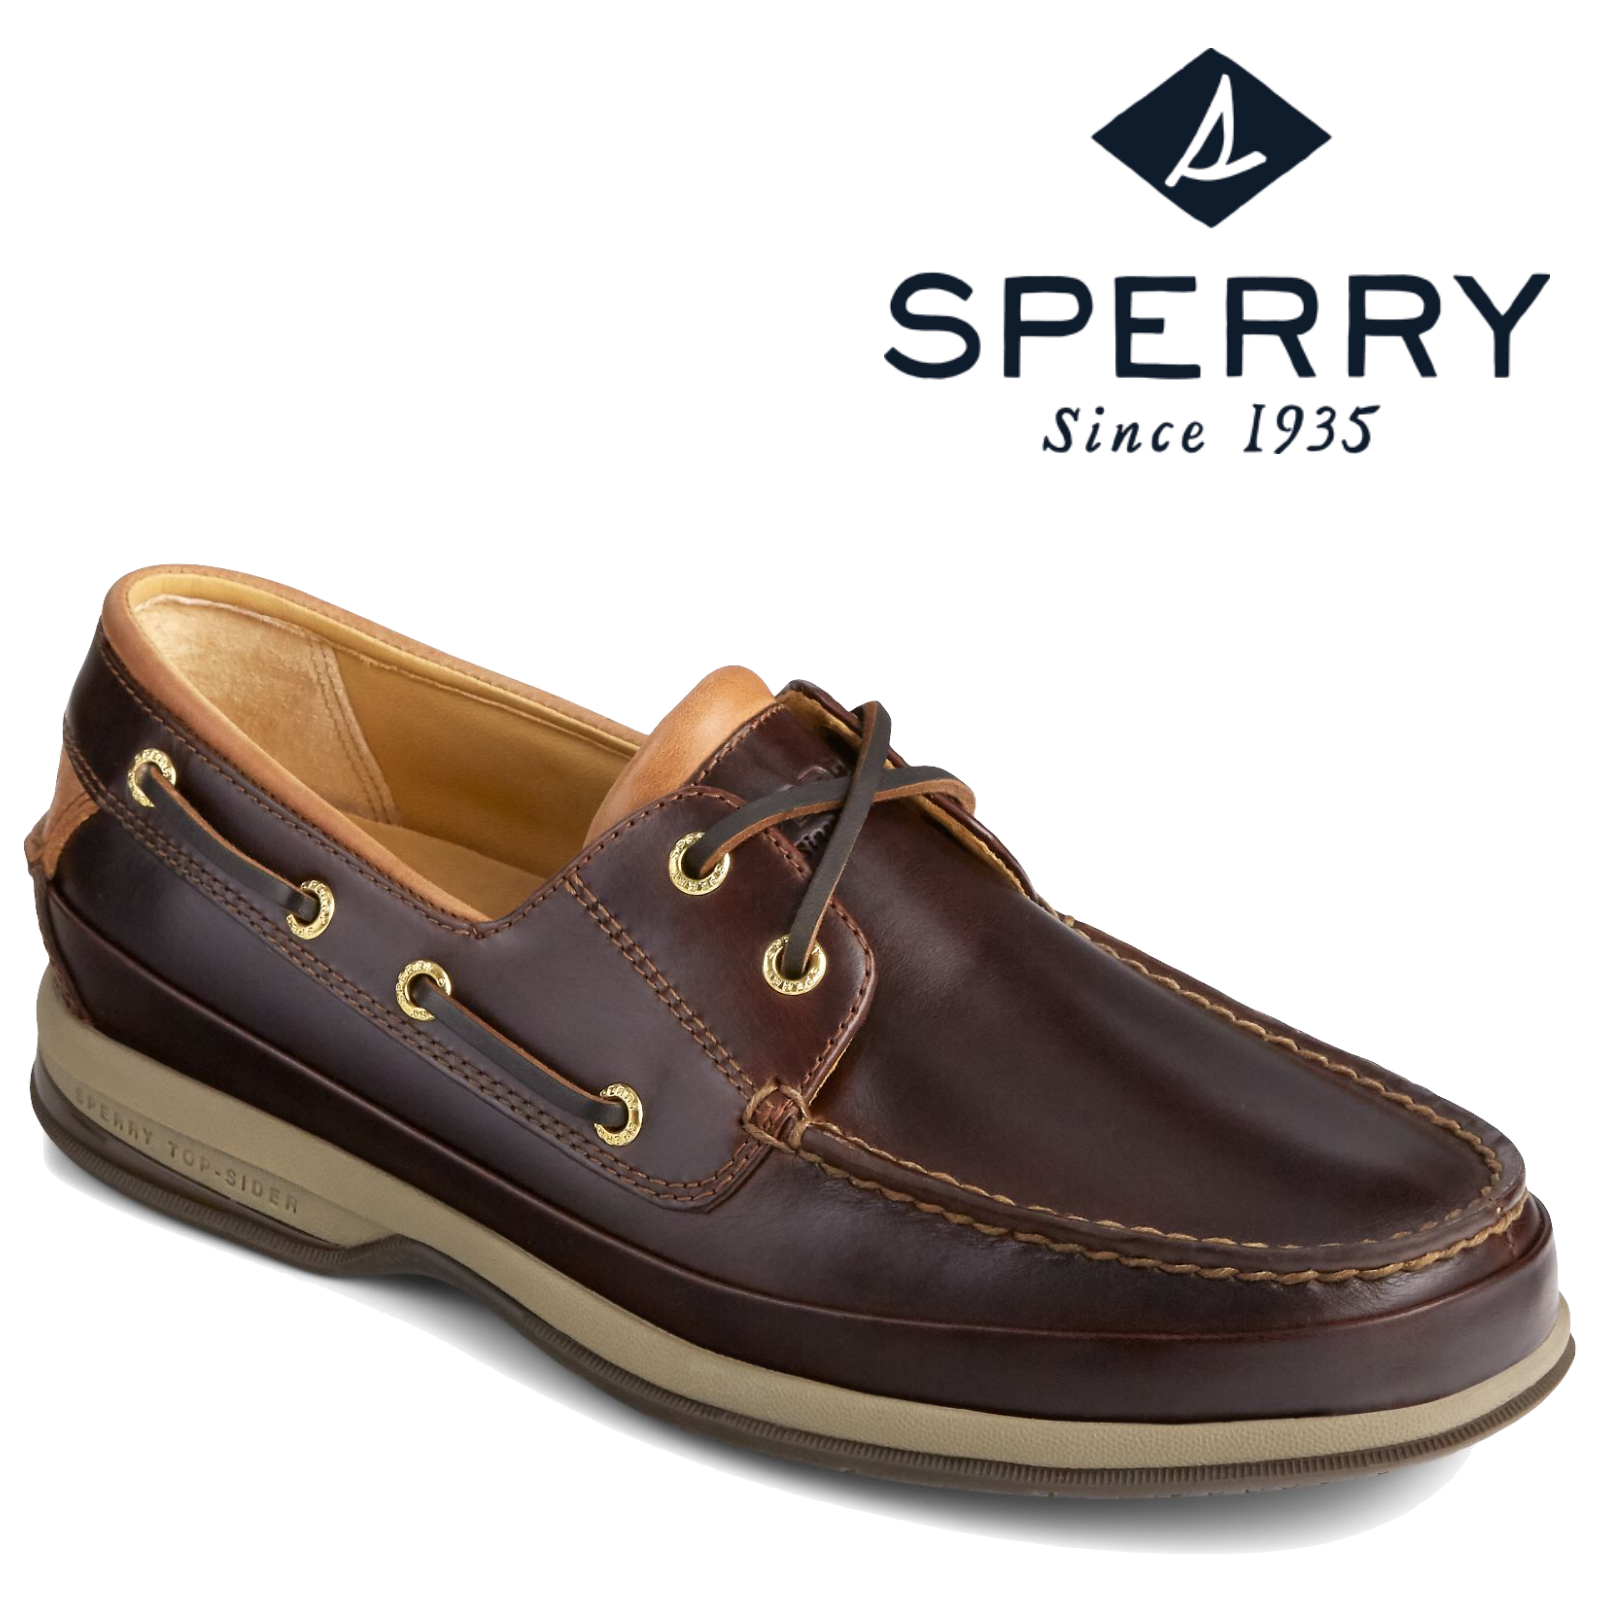 Sperry,Men's Gold Cup ASV 2 Eye Boat Shoes Wide Fit Leather,- Amaretto